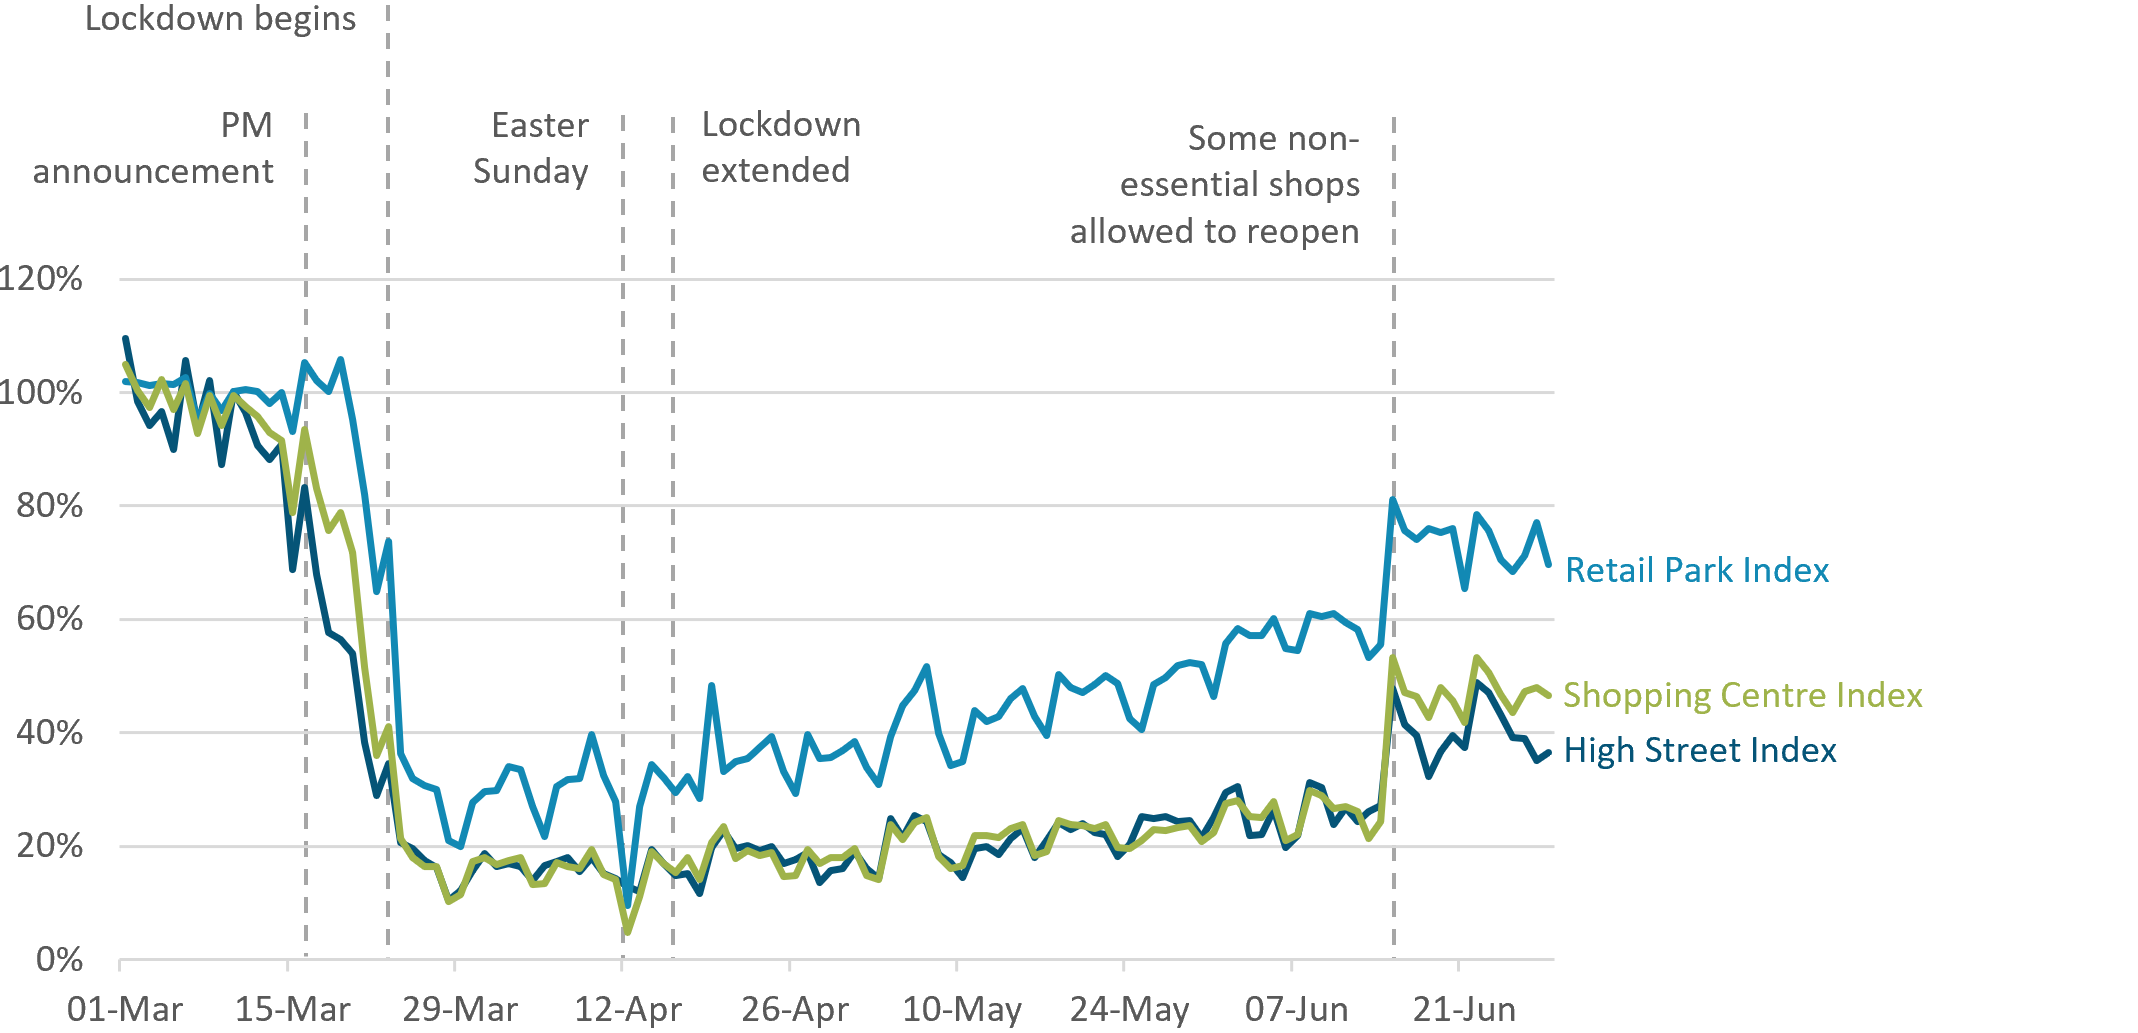 Footfall saw a substantial increase on 15 June 2020, when some non-essential shops were first allowed to reopen in England